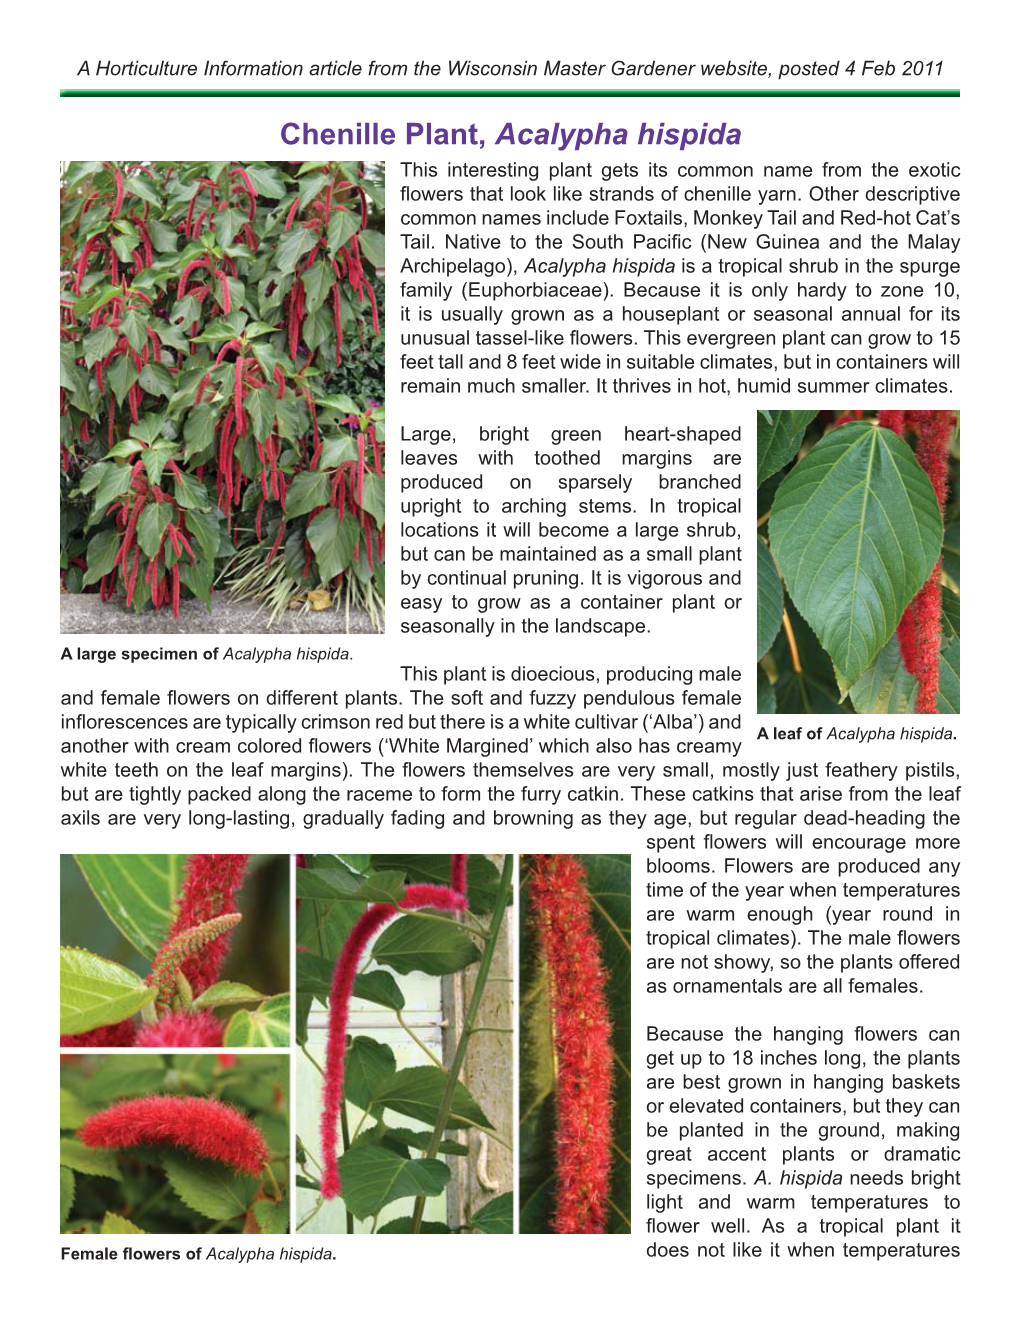 Chenille Plant, Acalypha Hispida This Interesting Plant Gets Its Common Name from the Exotic ﬂ Owers That Look Like Strands of Chenille Yarn